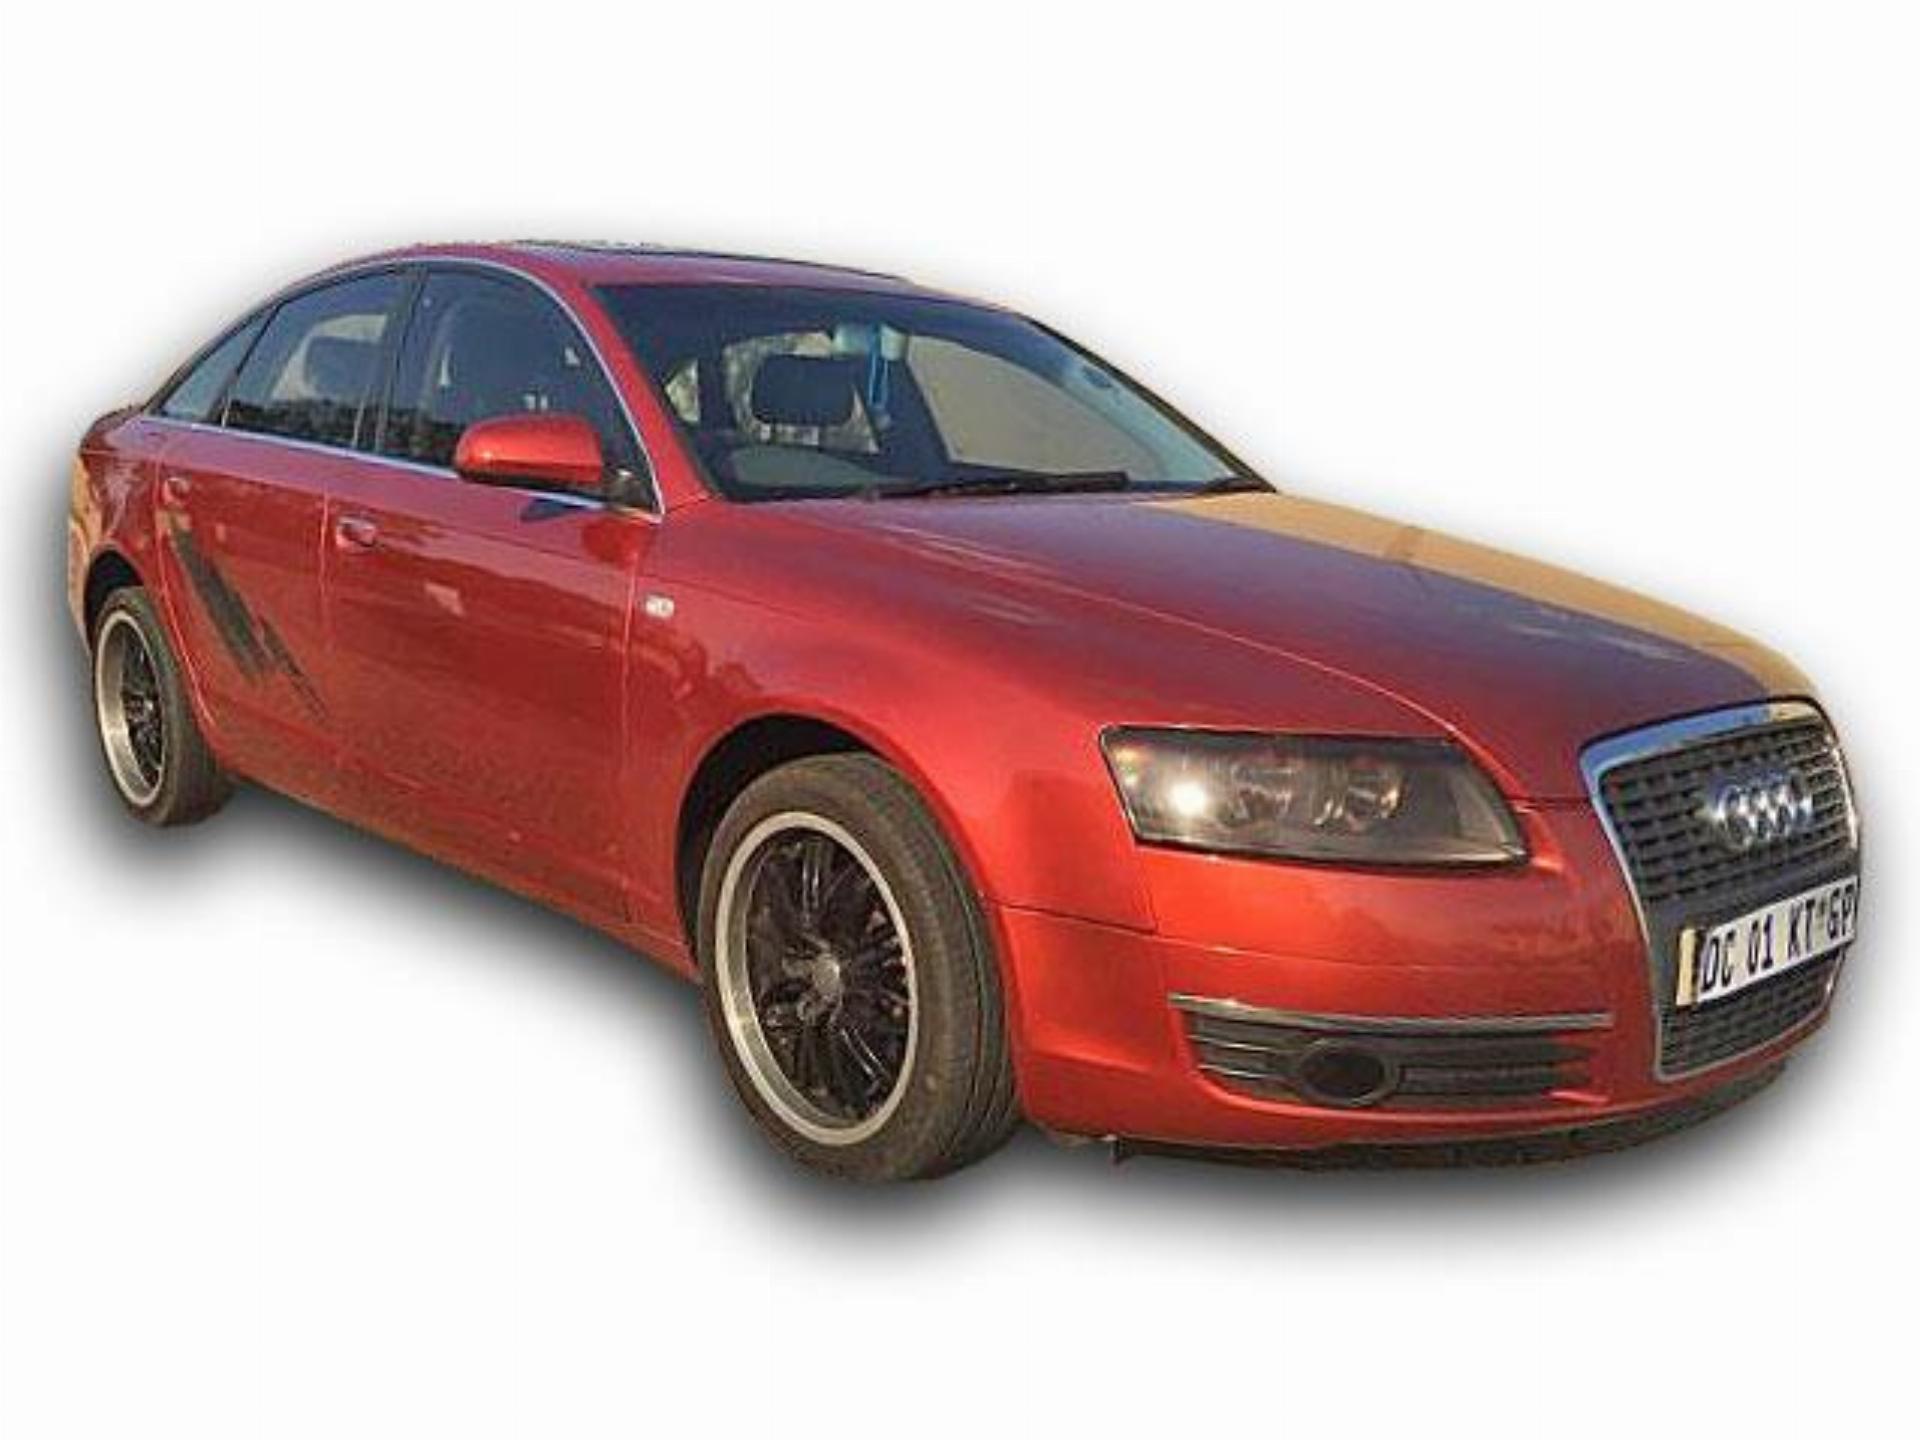 Audi A6 Very Good Condition